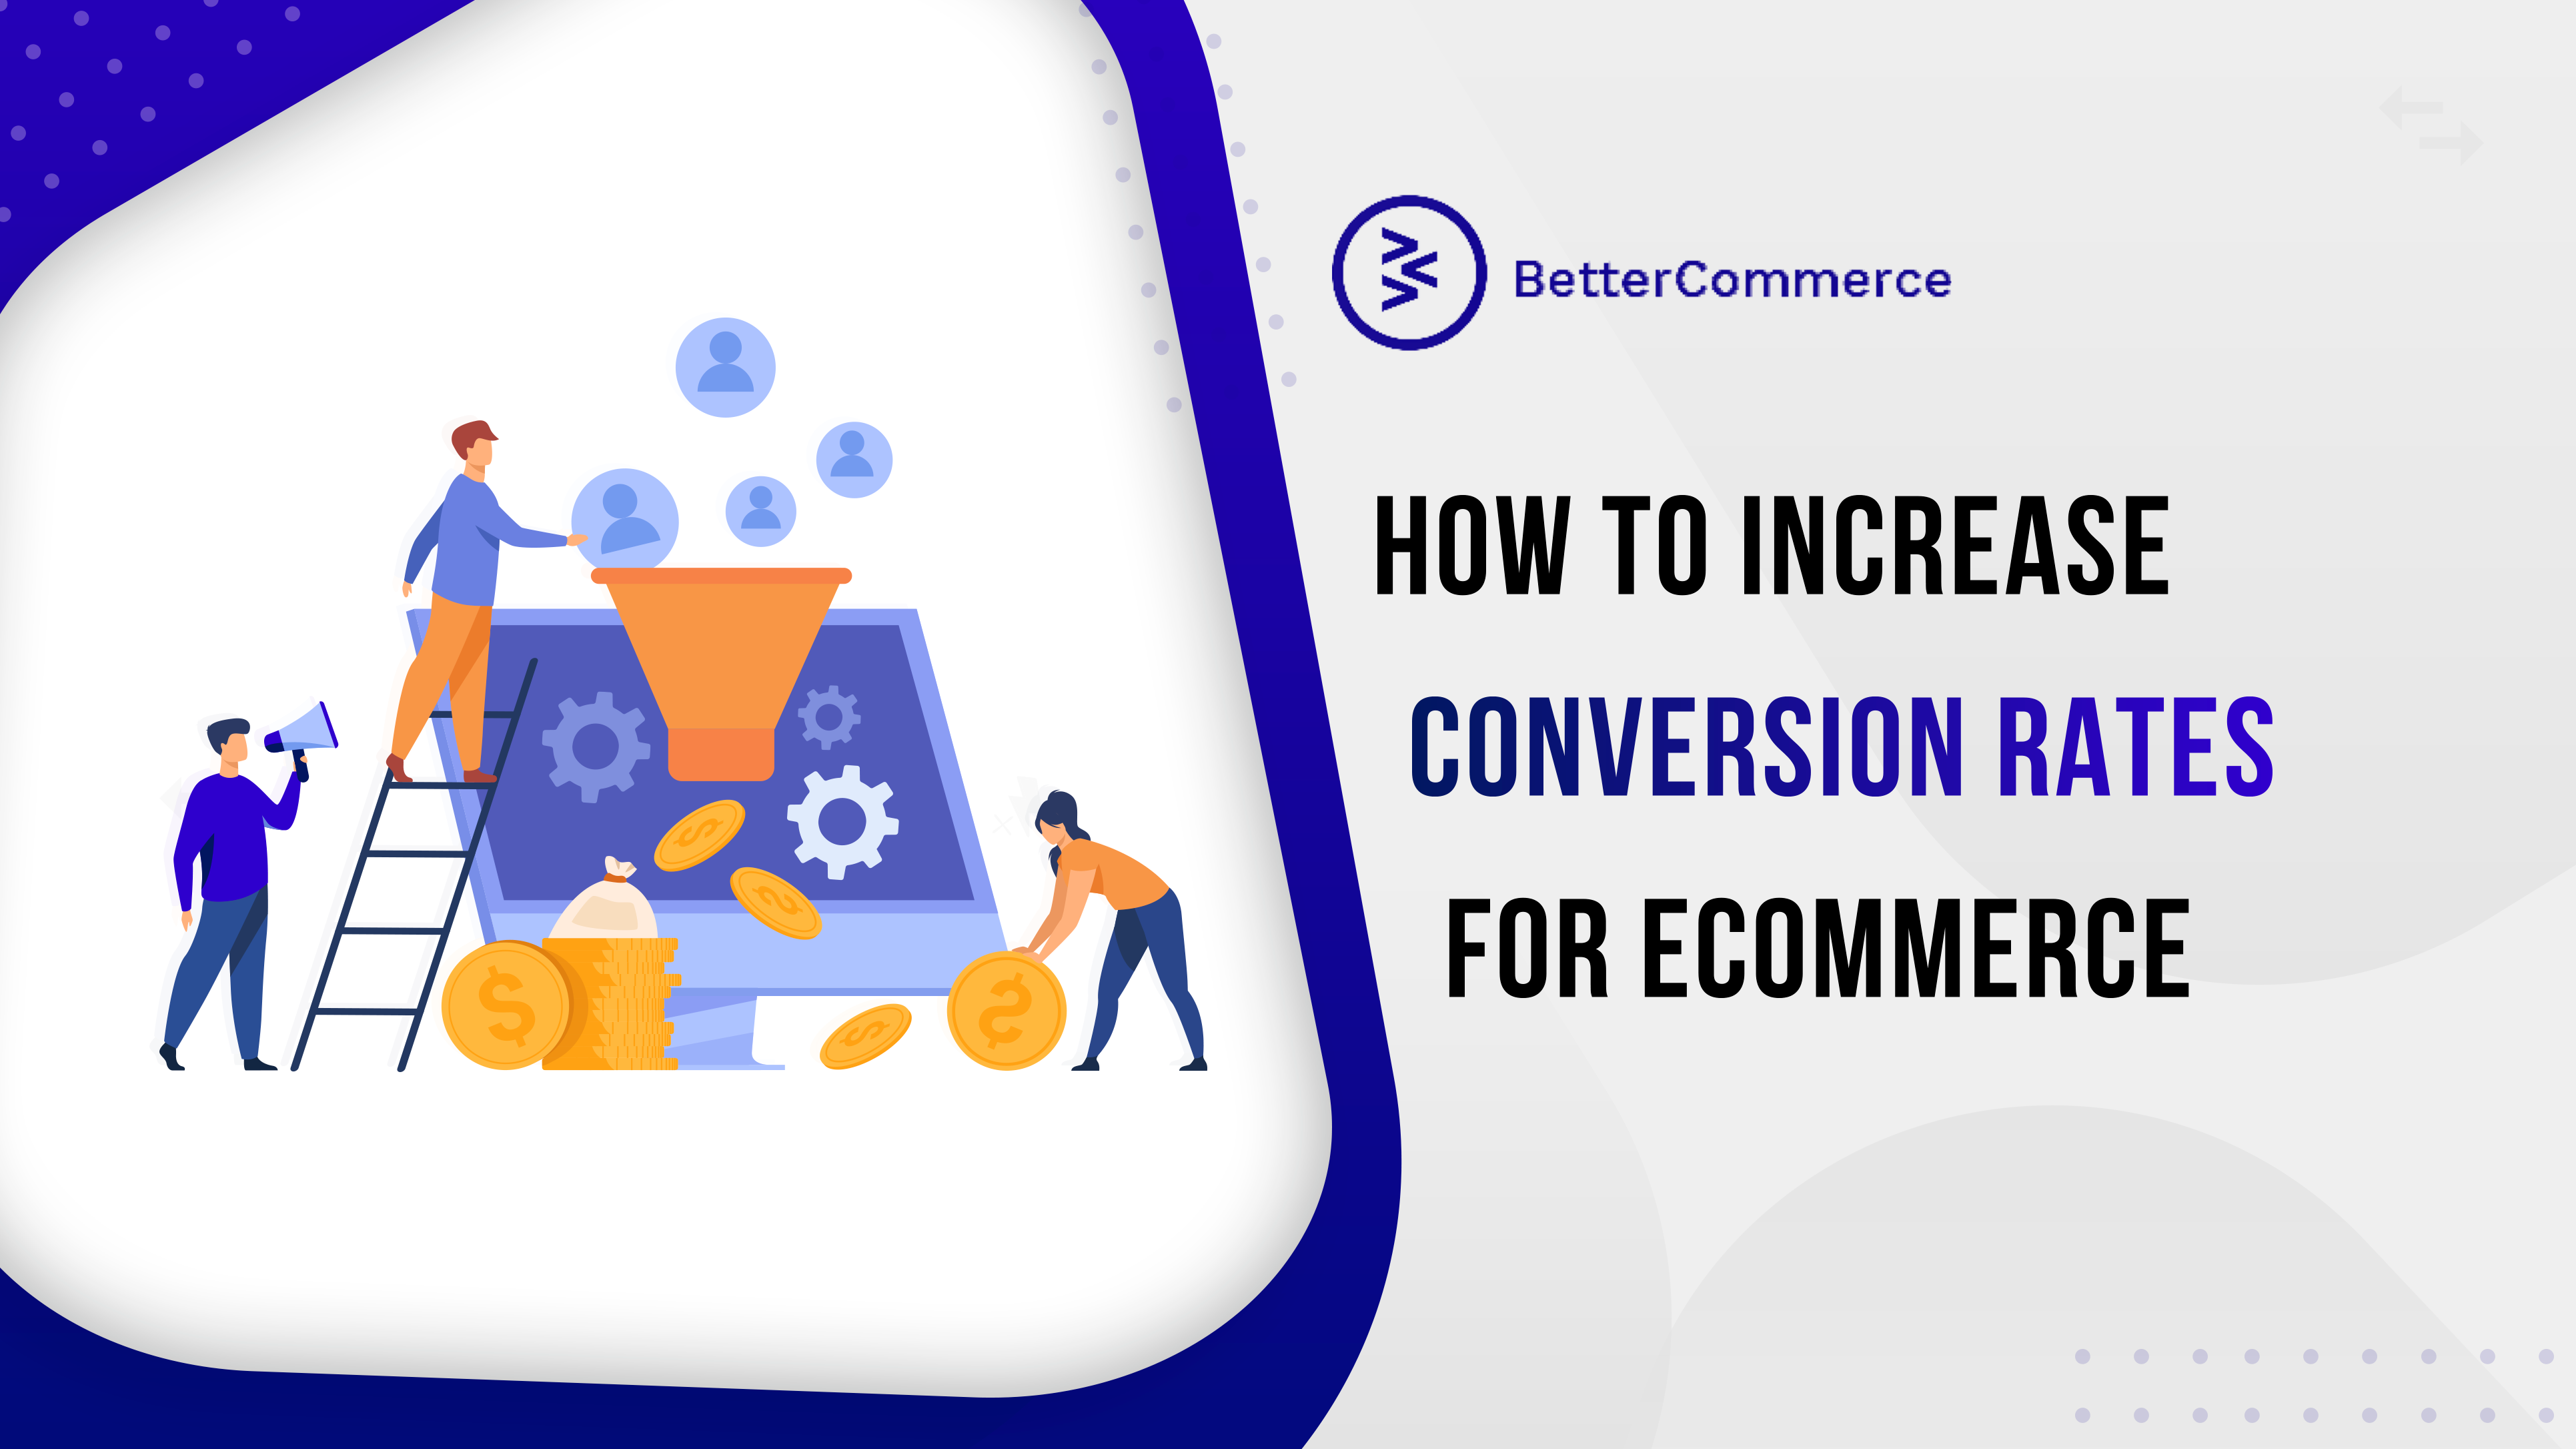 How to increase conversion rates for ecommerce